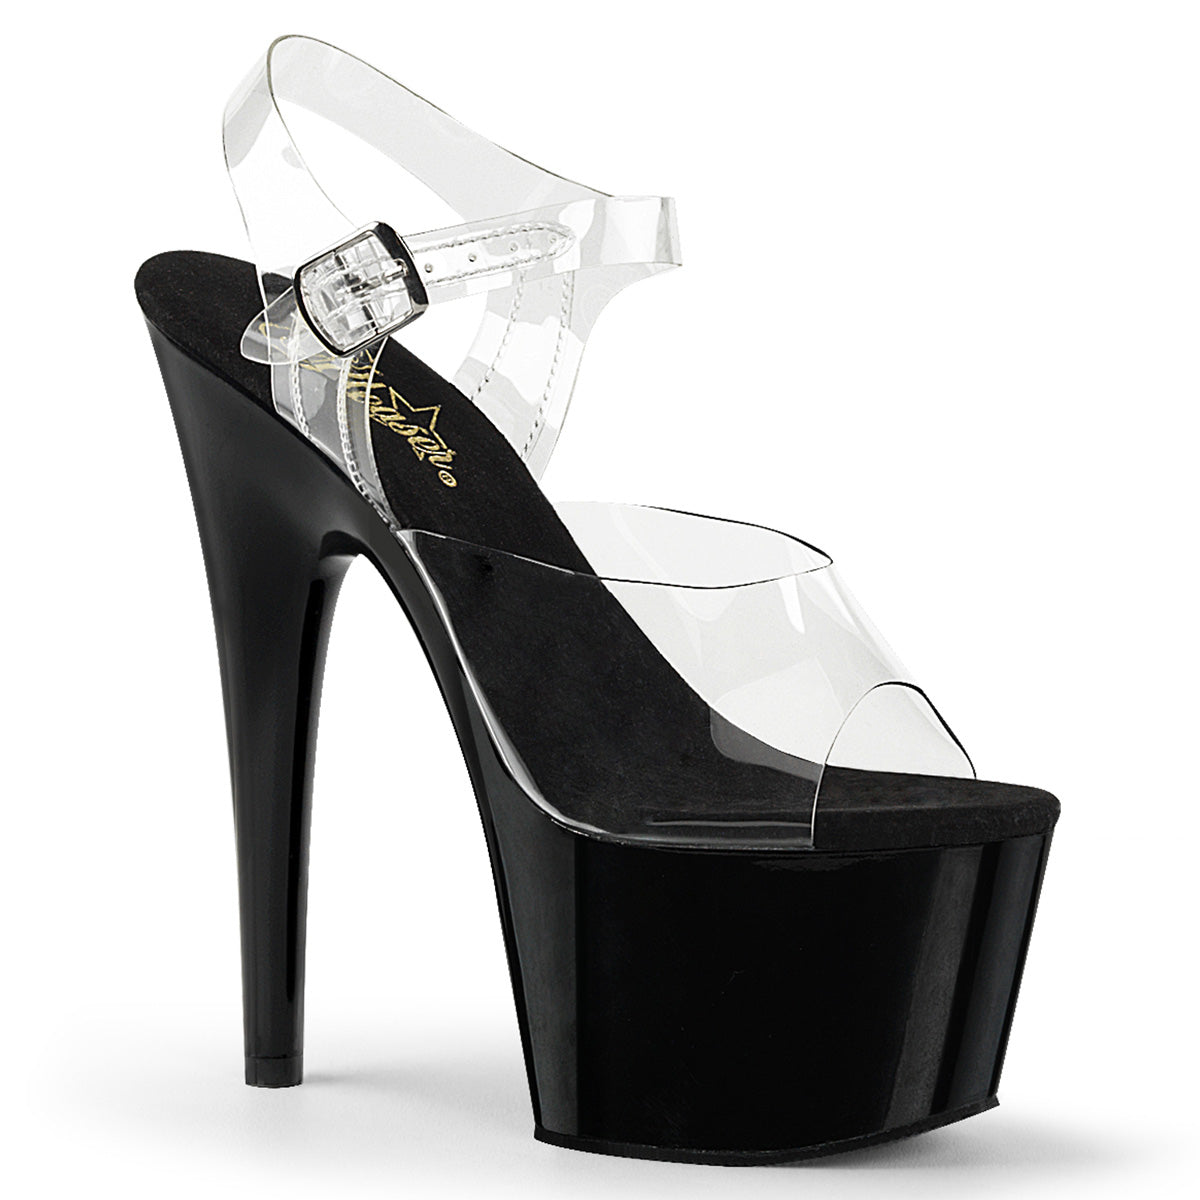 ADORE-708 / C / B 7 "PLEASER FAST DELIVERY 24-48h 